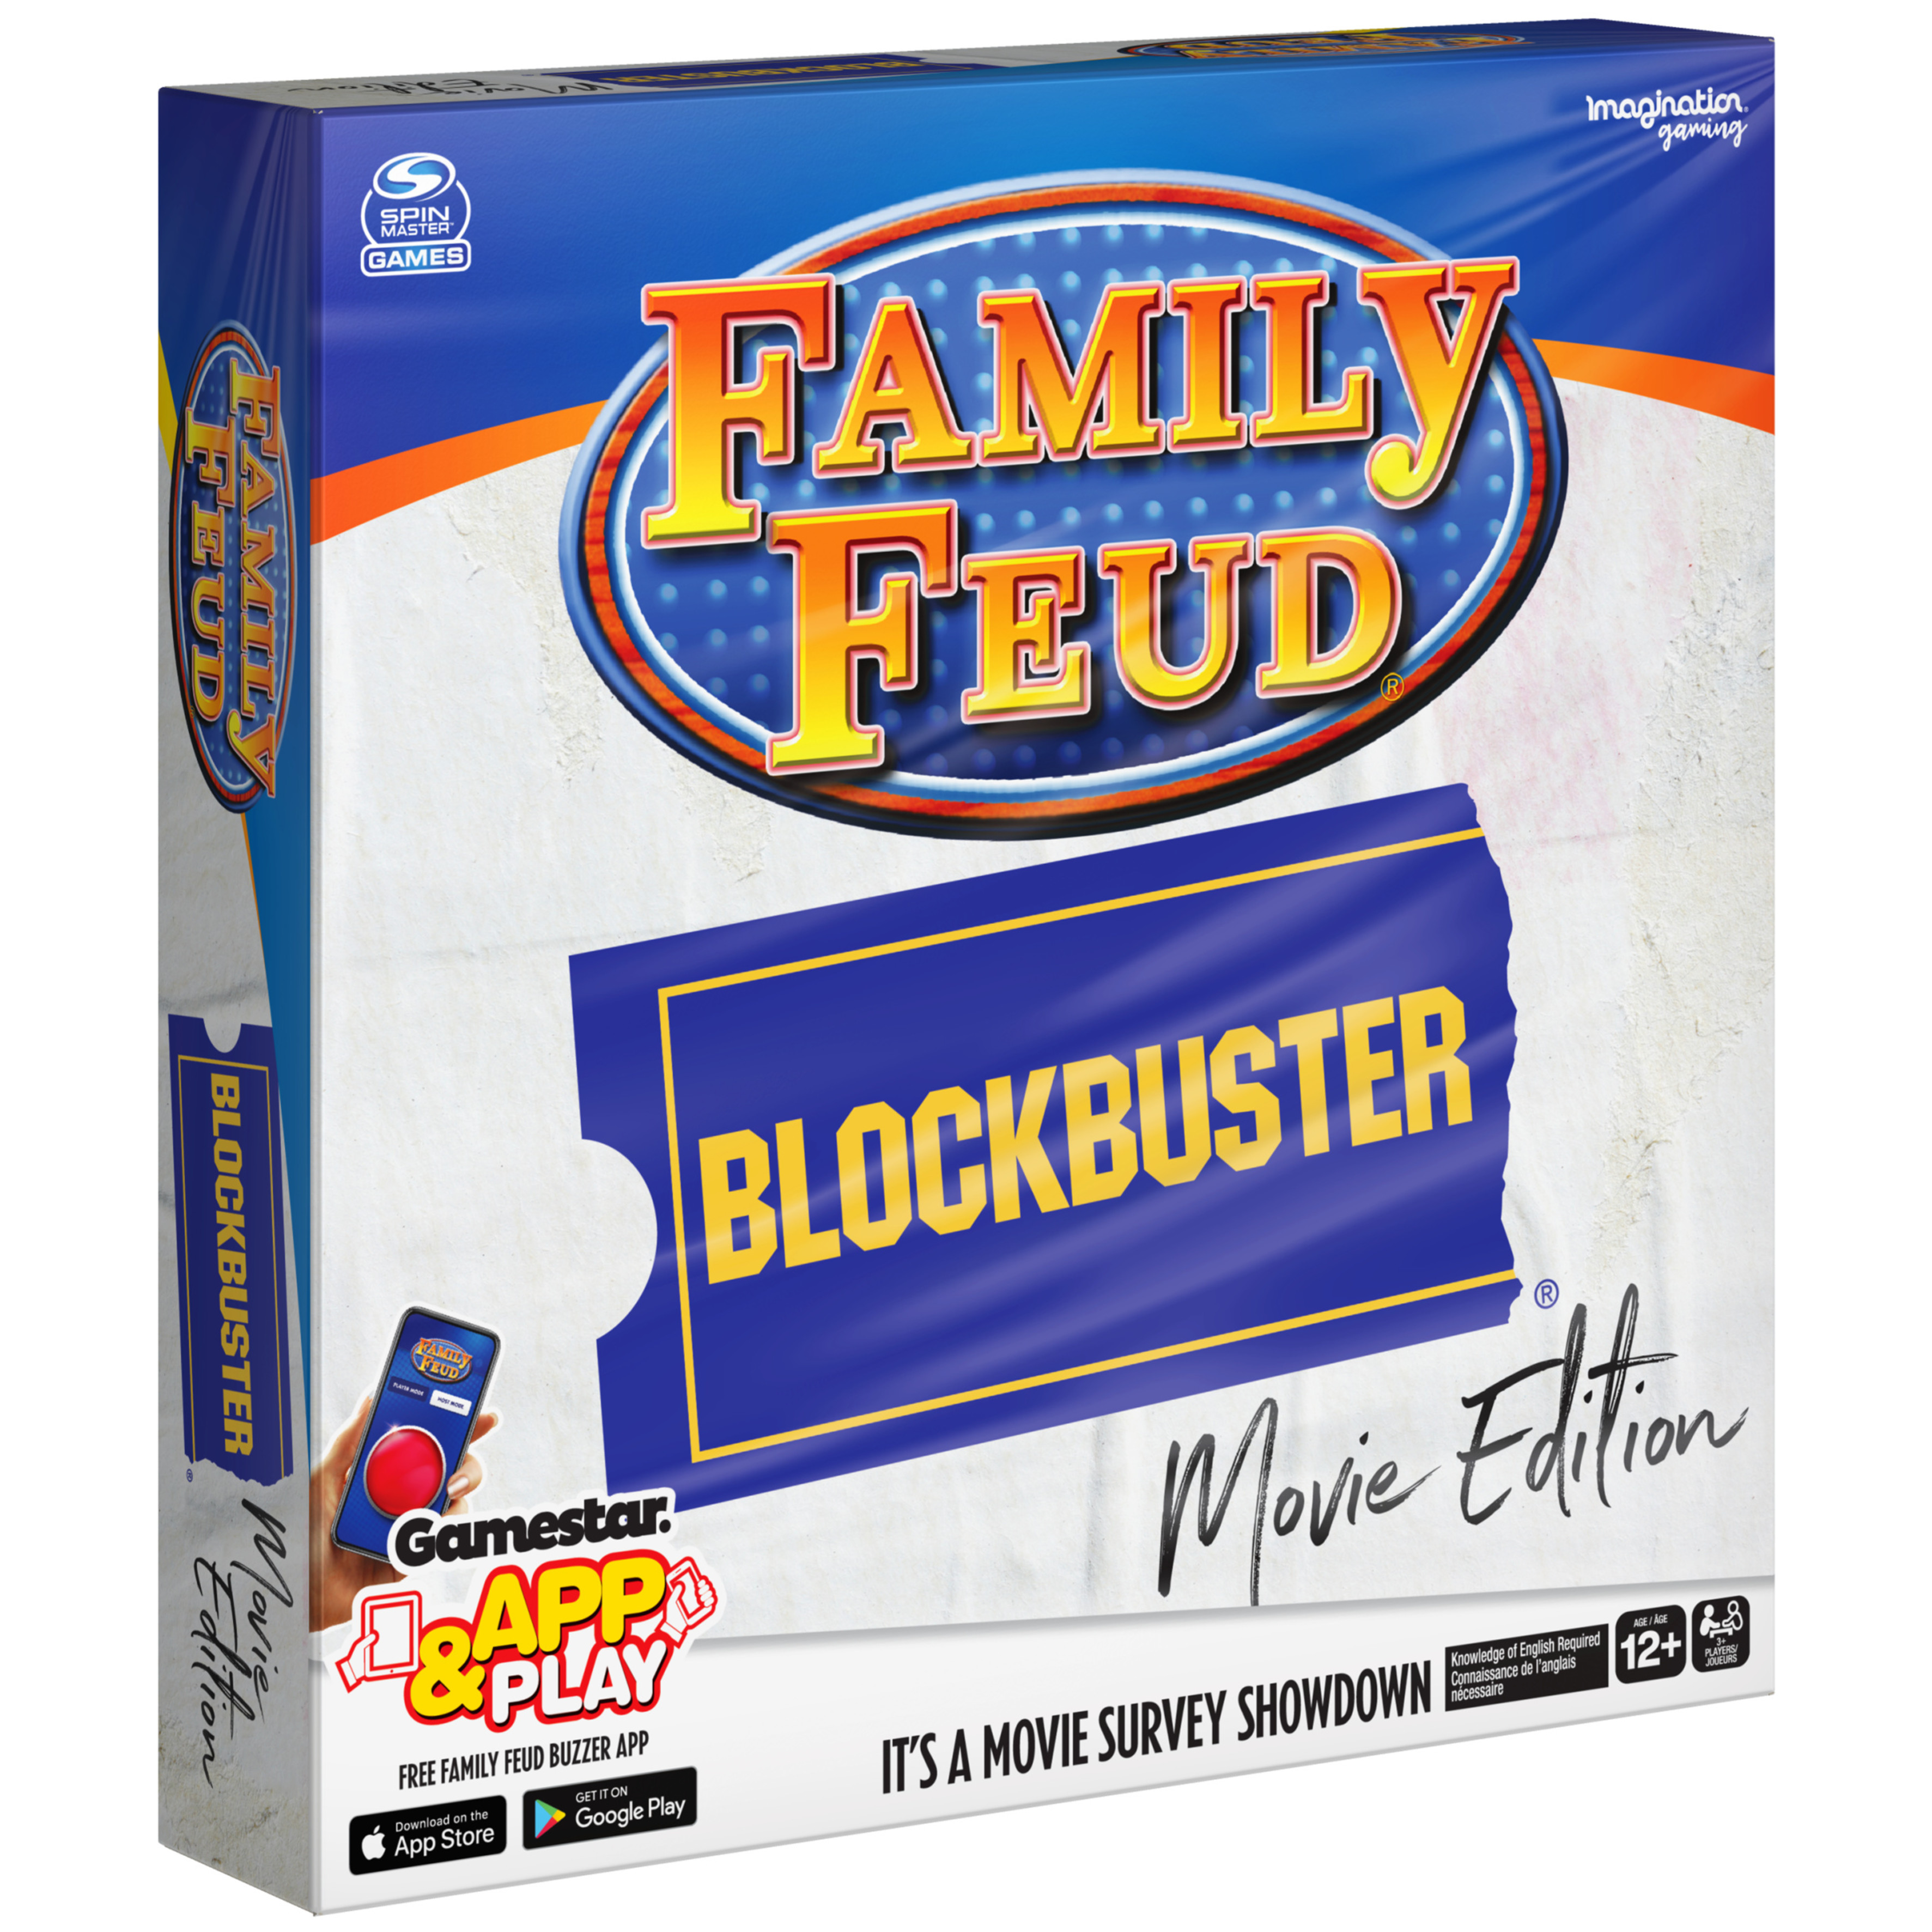 Family Feud Blockbuster Edition, Movie Trivia Survey Showdown Board Game for Ages 12 & up - image 5 of 6